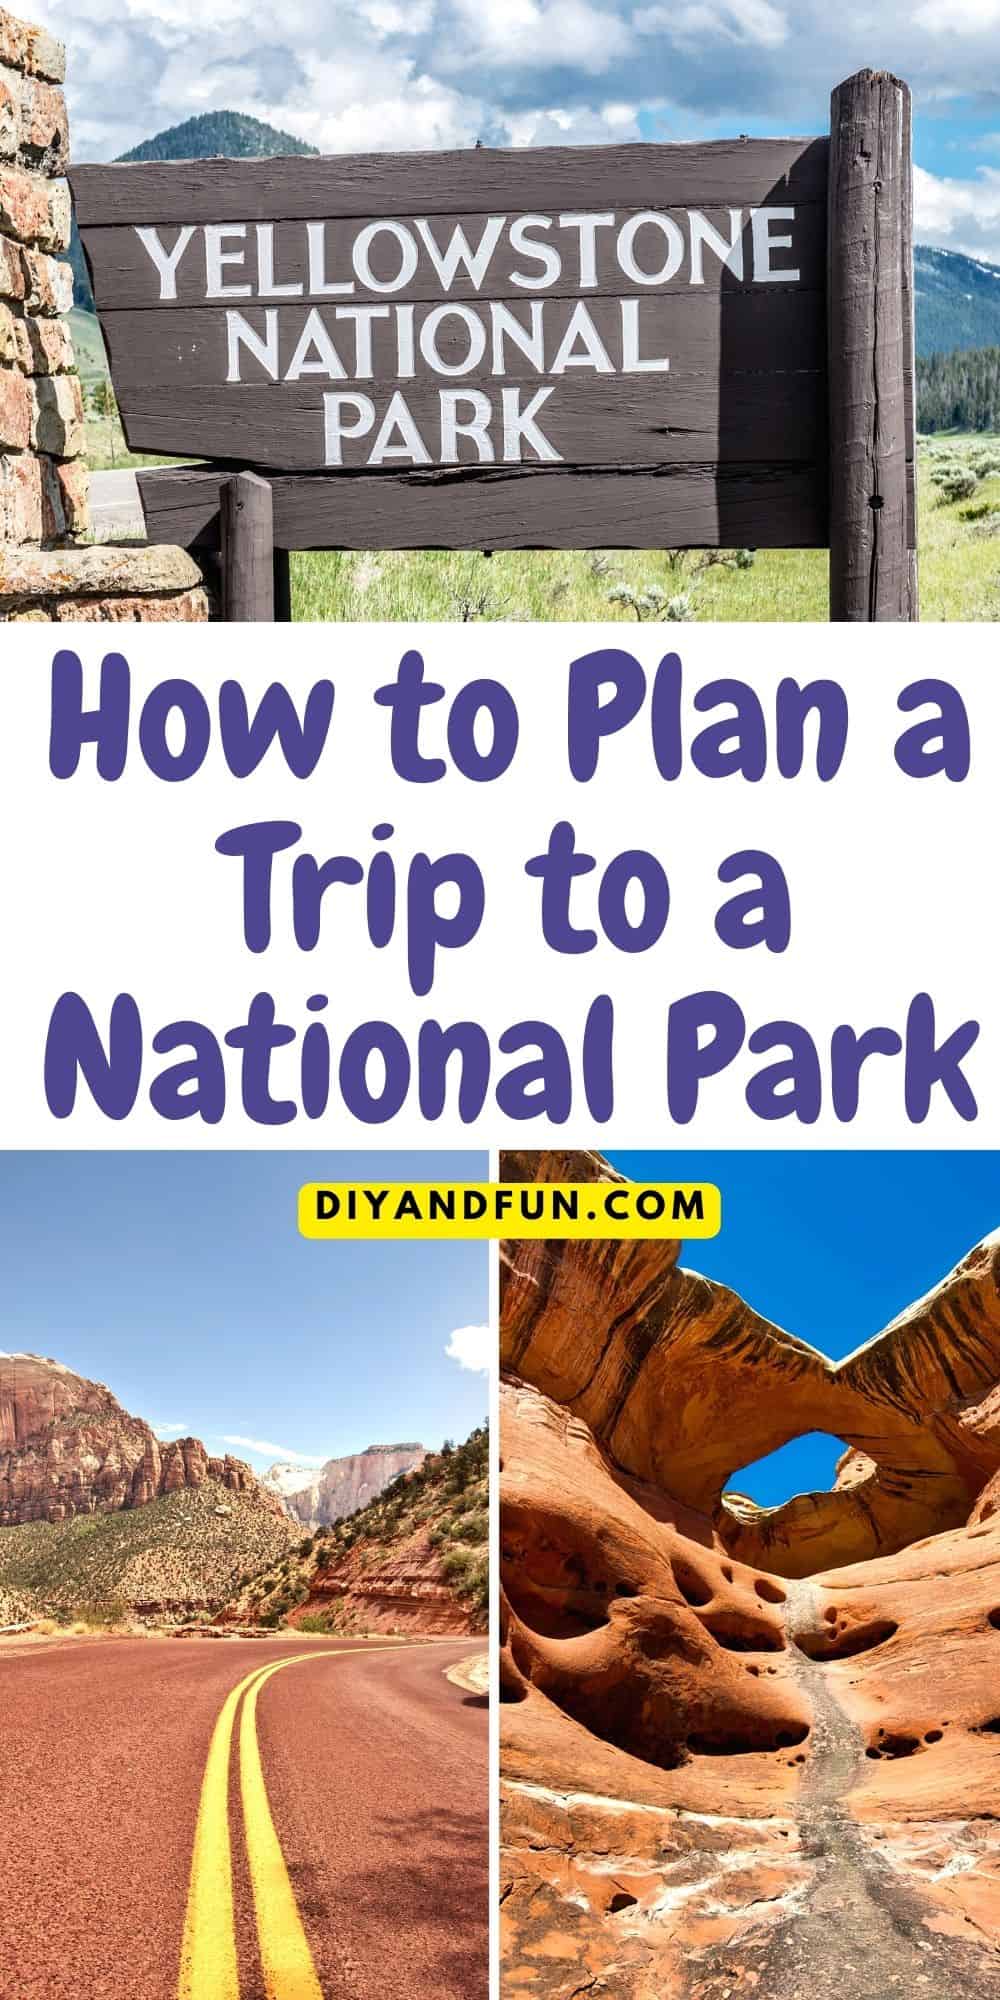 How to plan a Trip to a National Park. Includes the best time to visit a national park, listing of the most popular and scenic parks.